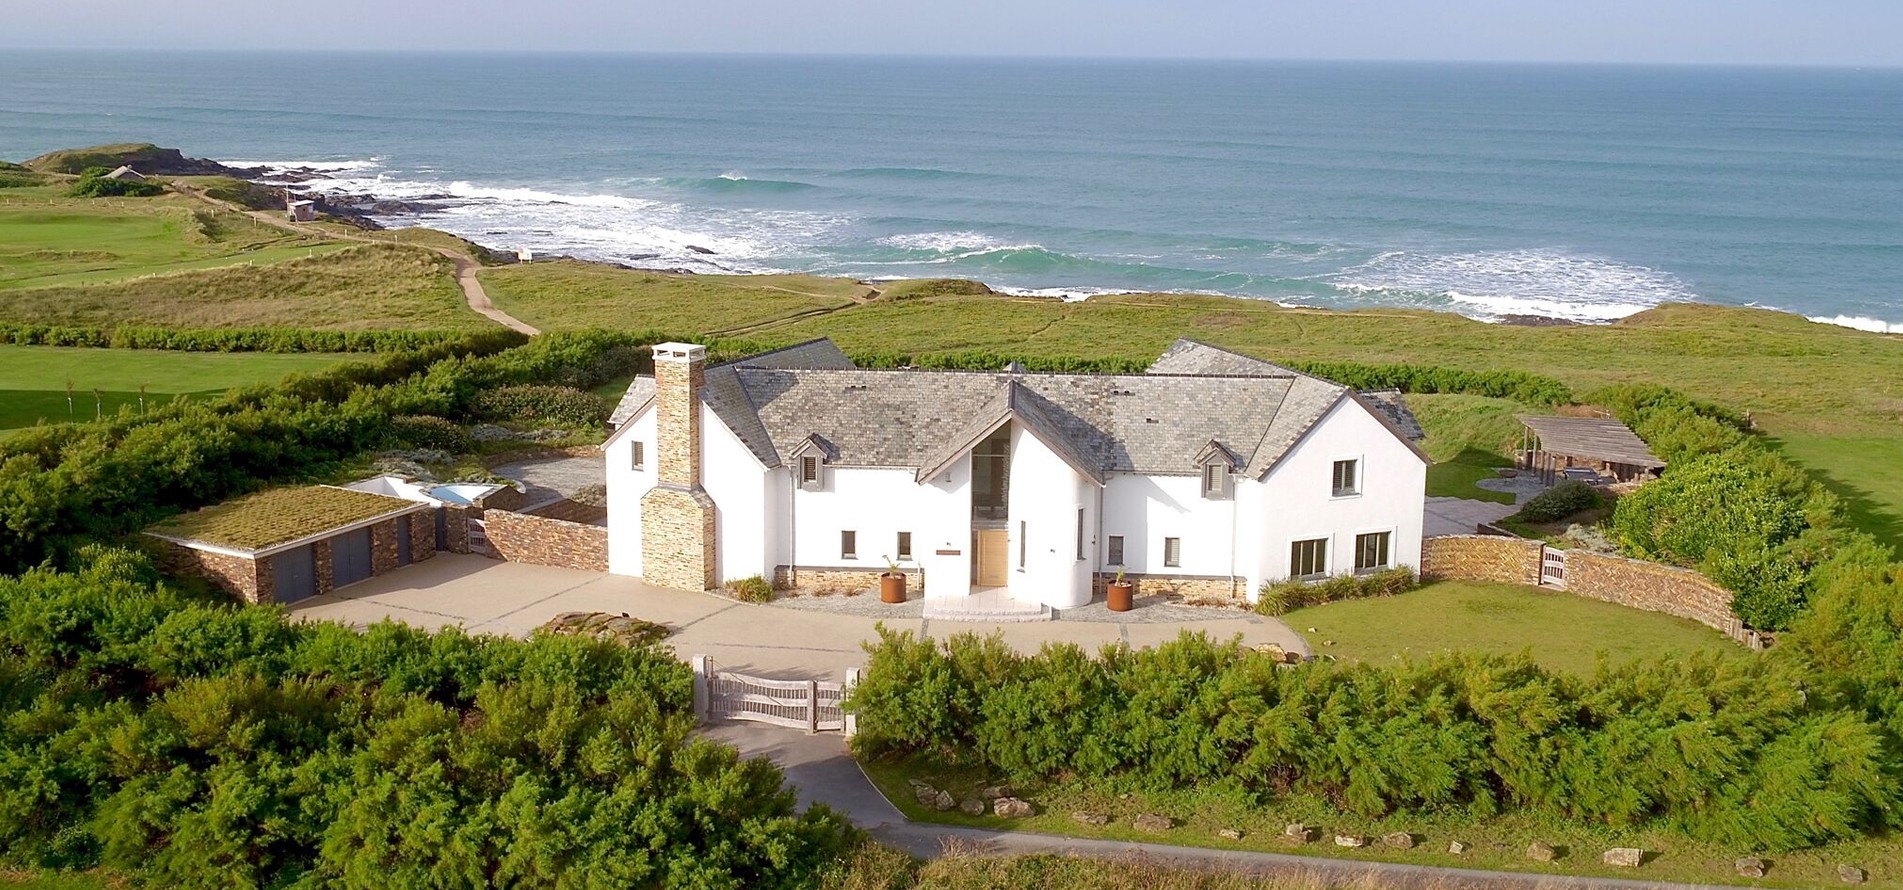 jersey holiday cottages luxury